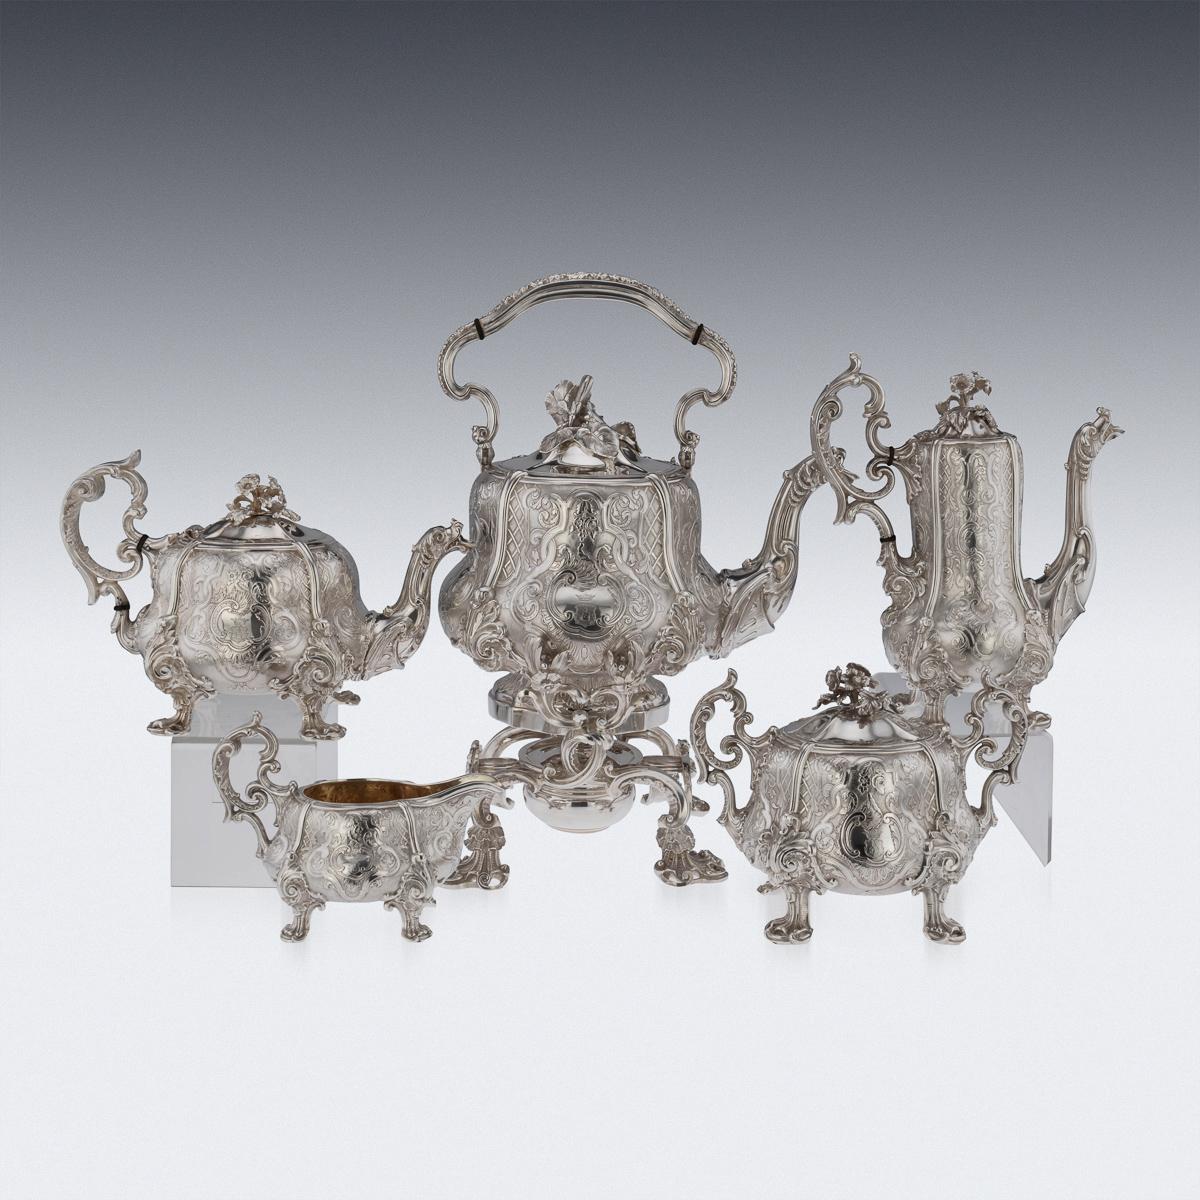 Antique 19th century French exceptional solid silver tea service, comprising: Kettle on stand, teapot, coffee pot, lidded sugar bowl and cream jug; all circular shaped with panels chased with latticework and foliate scrolls on a matted ground, the